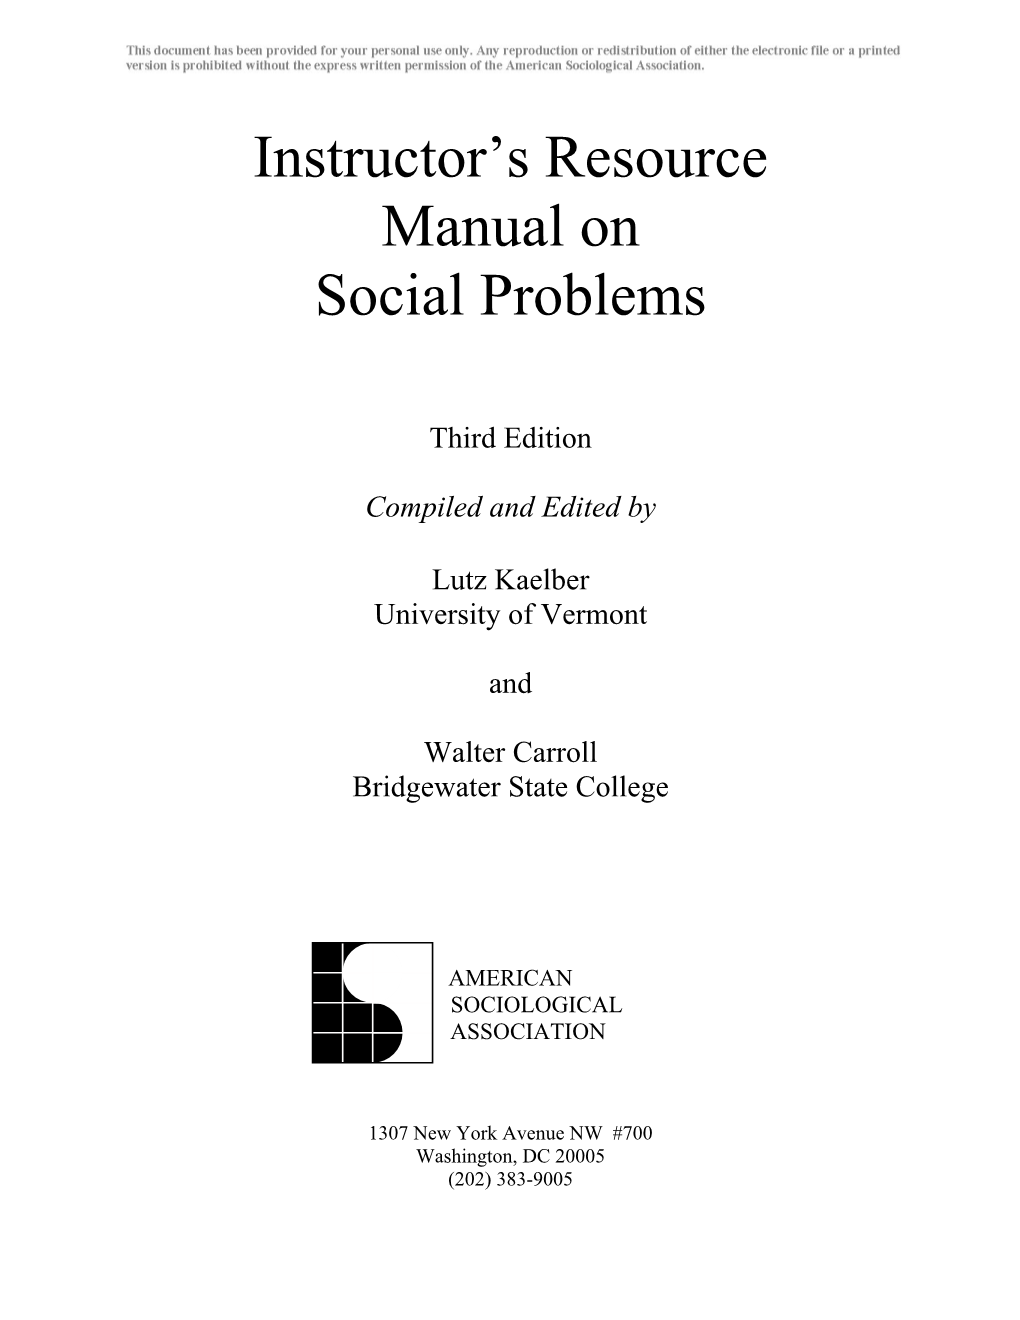 Instructor's Resource Manual on Social Problems